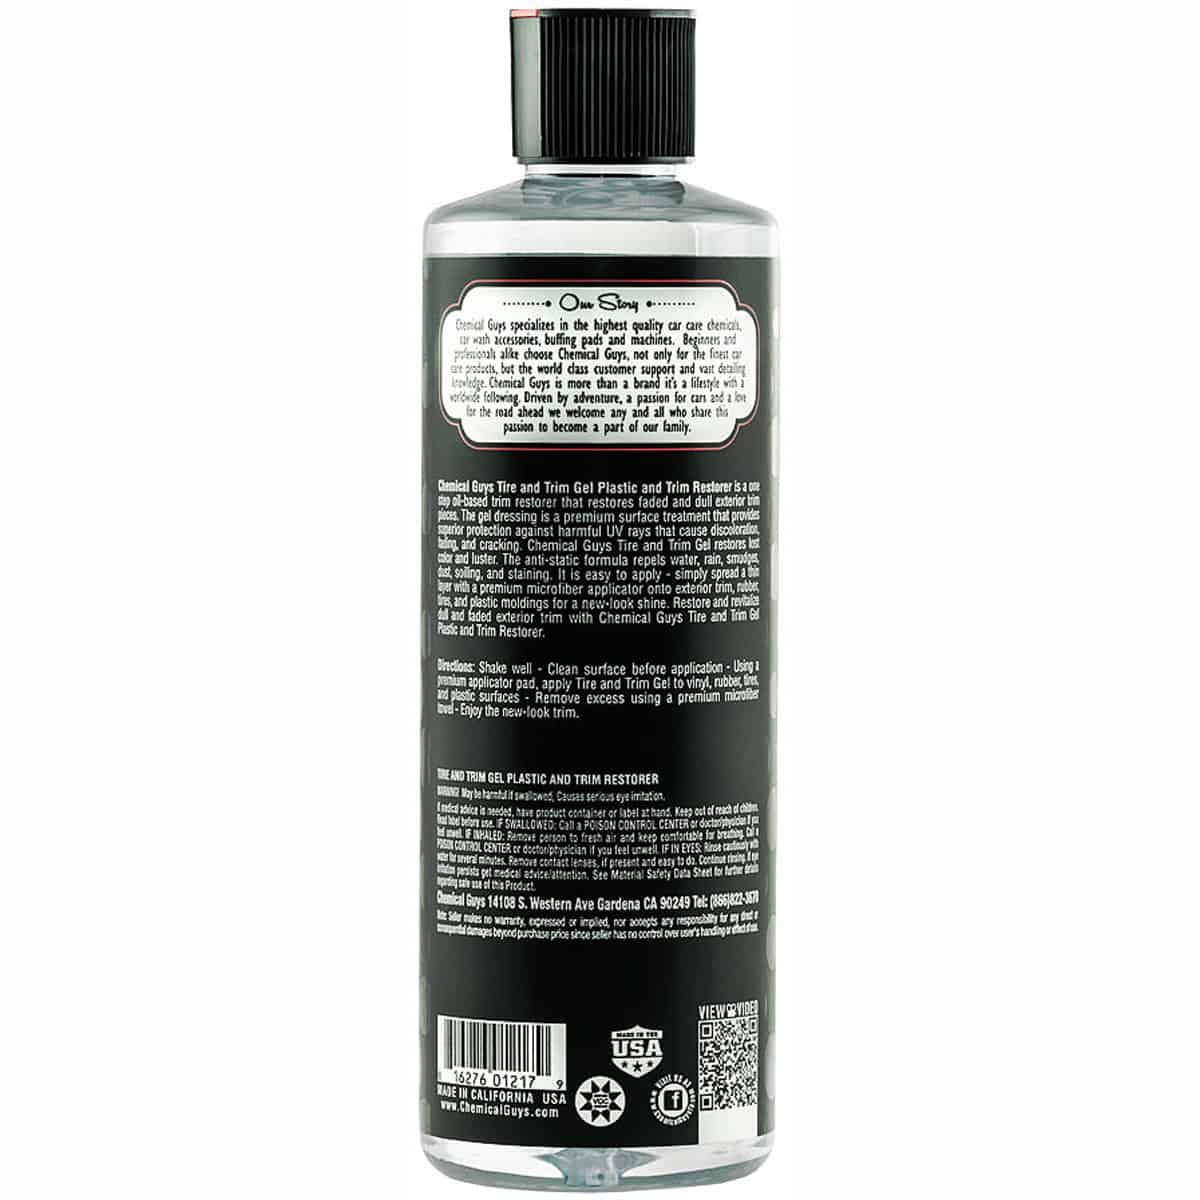 Restore faded trims and tyres: Chemical Guys Gel Black Forever Trim and Tire instructions